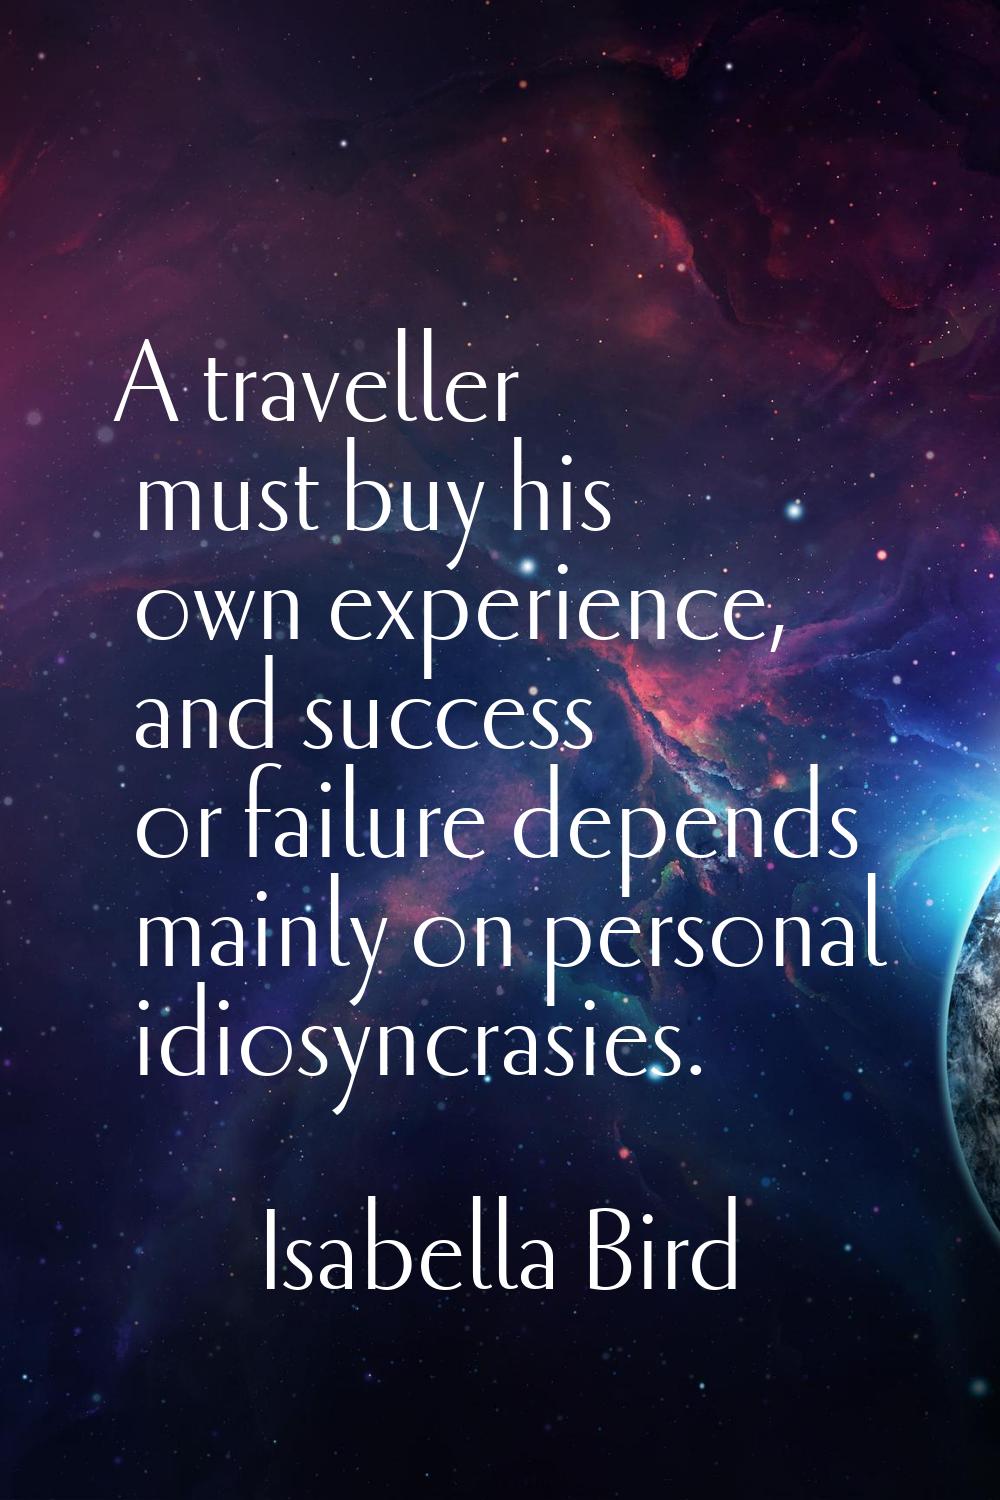 A traveller must buy his own experience, and success or failure depends mainly on personal idiosync